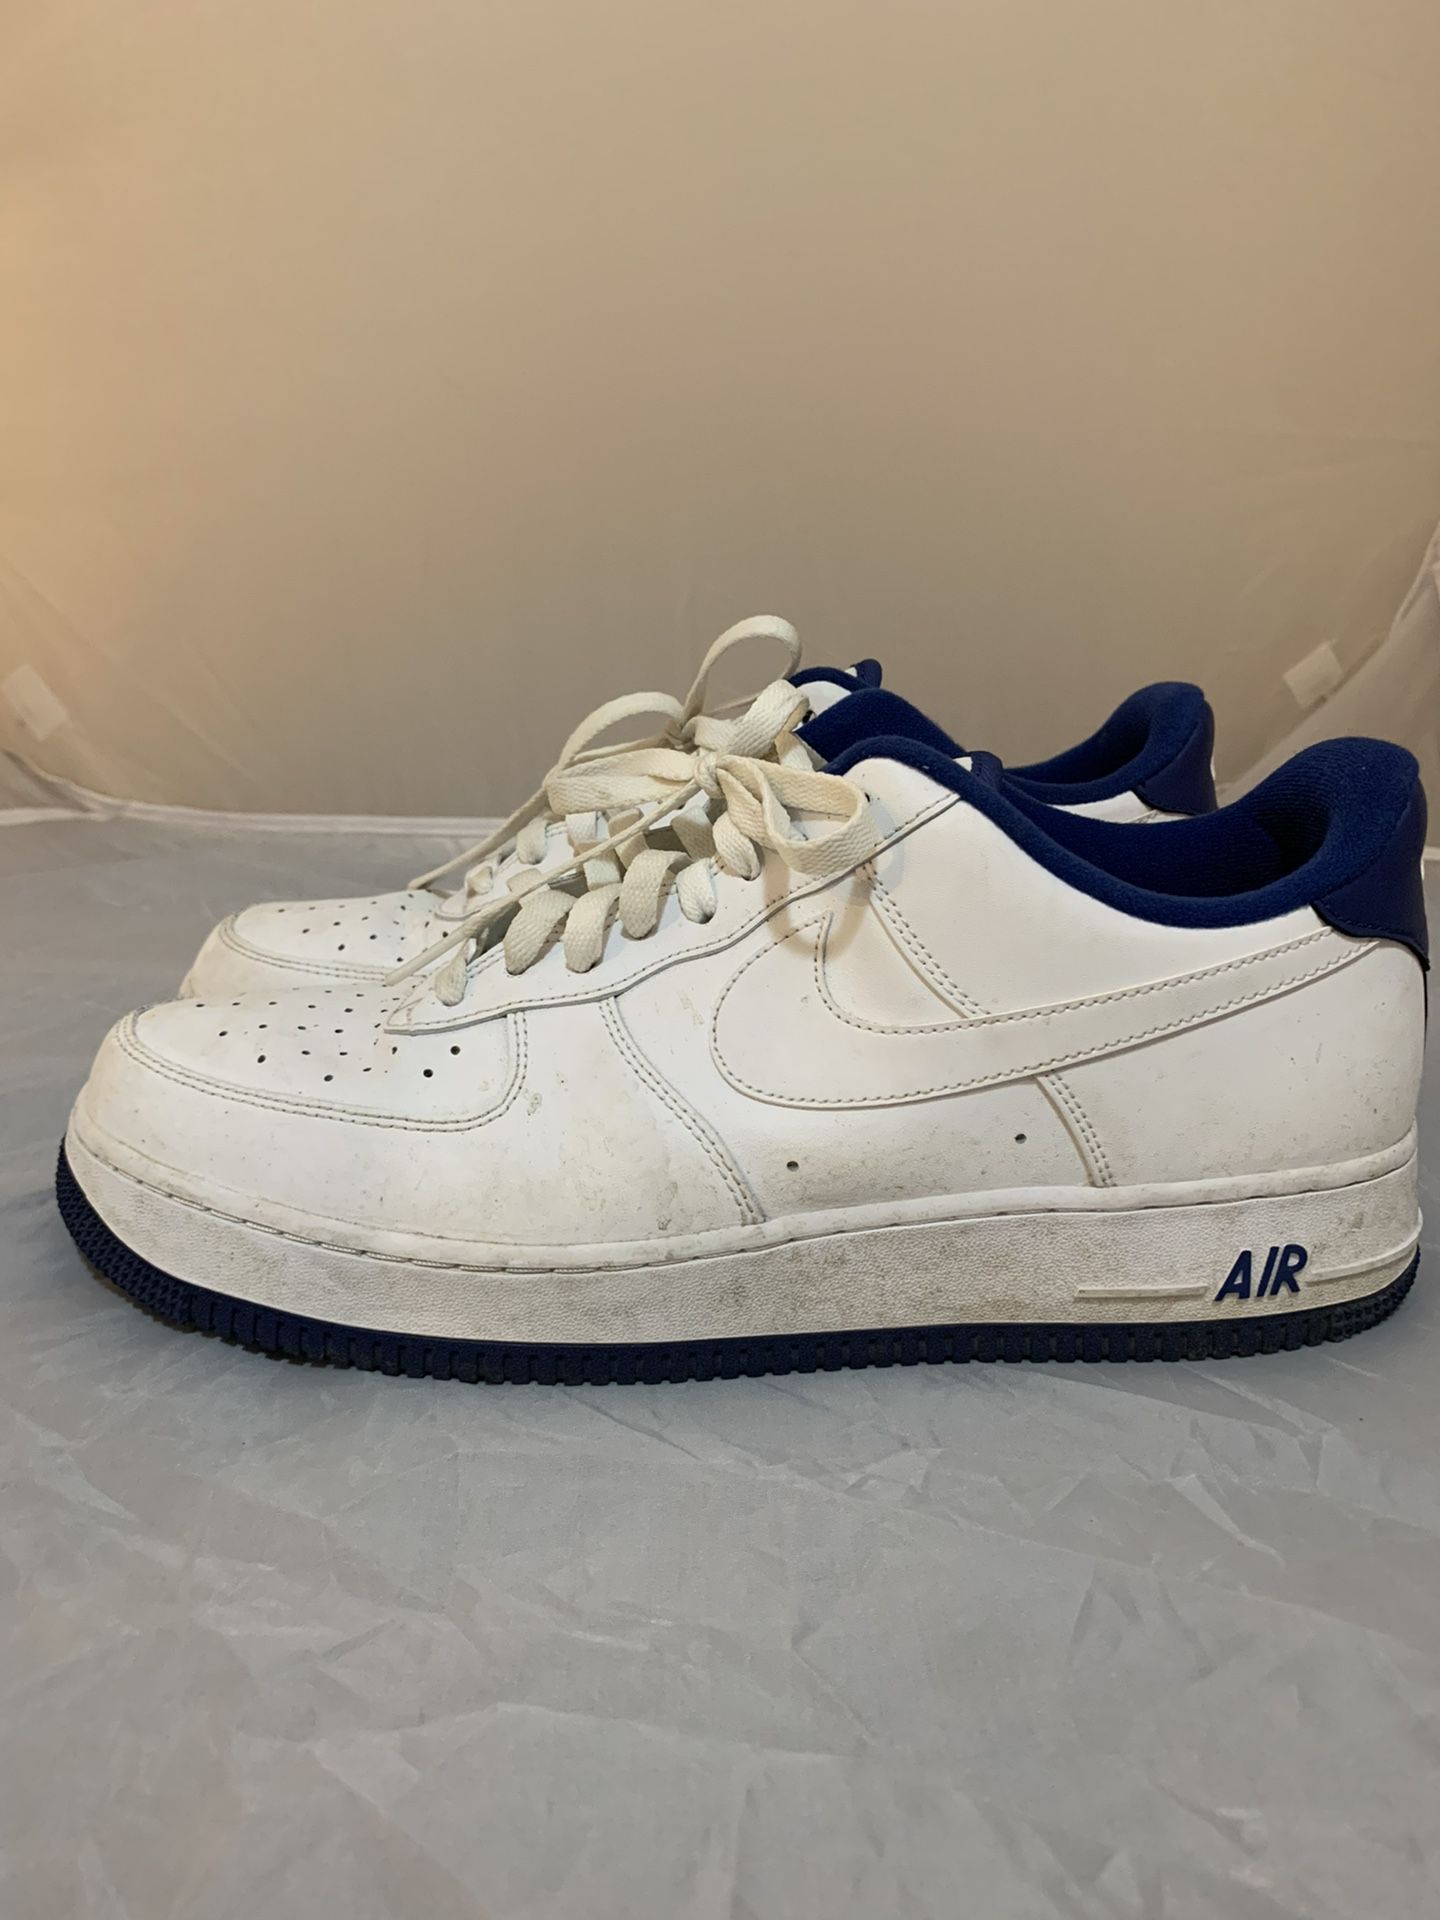 Nike Air Force 1 Low navy white men's shoes size 11 CD0884 102